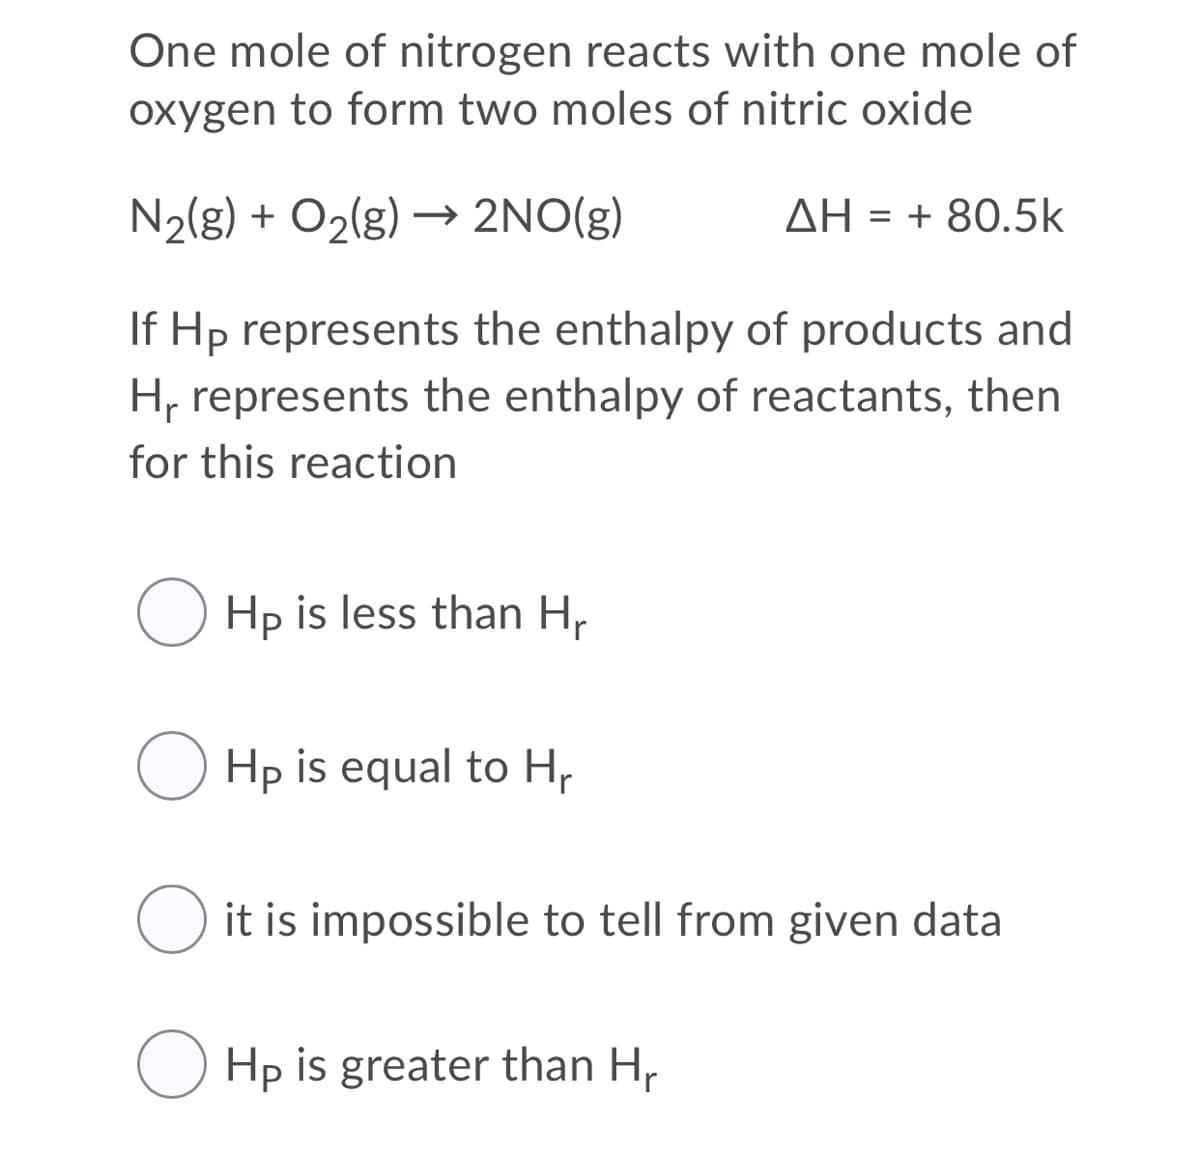 One mole of nitrogen reacts with one mole of
oxygen to form two moles of nitric oxide
N2(g) + O2(g) → 2NO(g)
ΔΗ-+ 80.5k
If Hp represents the enthalpy of products and
H, represents the enthalpy of reactants, then
for this reaction
O Hp is less than H,
O Hp is equal to Hp
O it is impossible to tell from given data
O Hp is greater than H,
